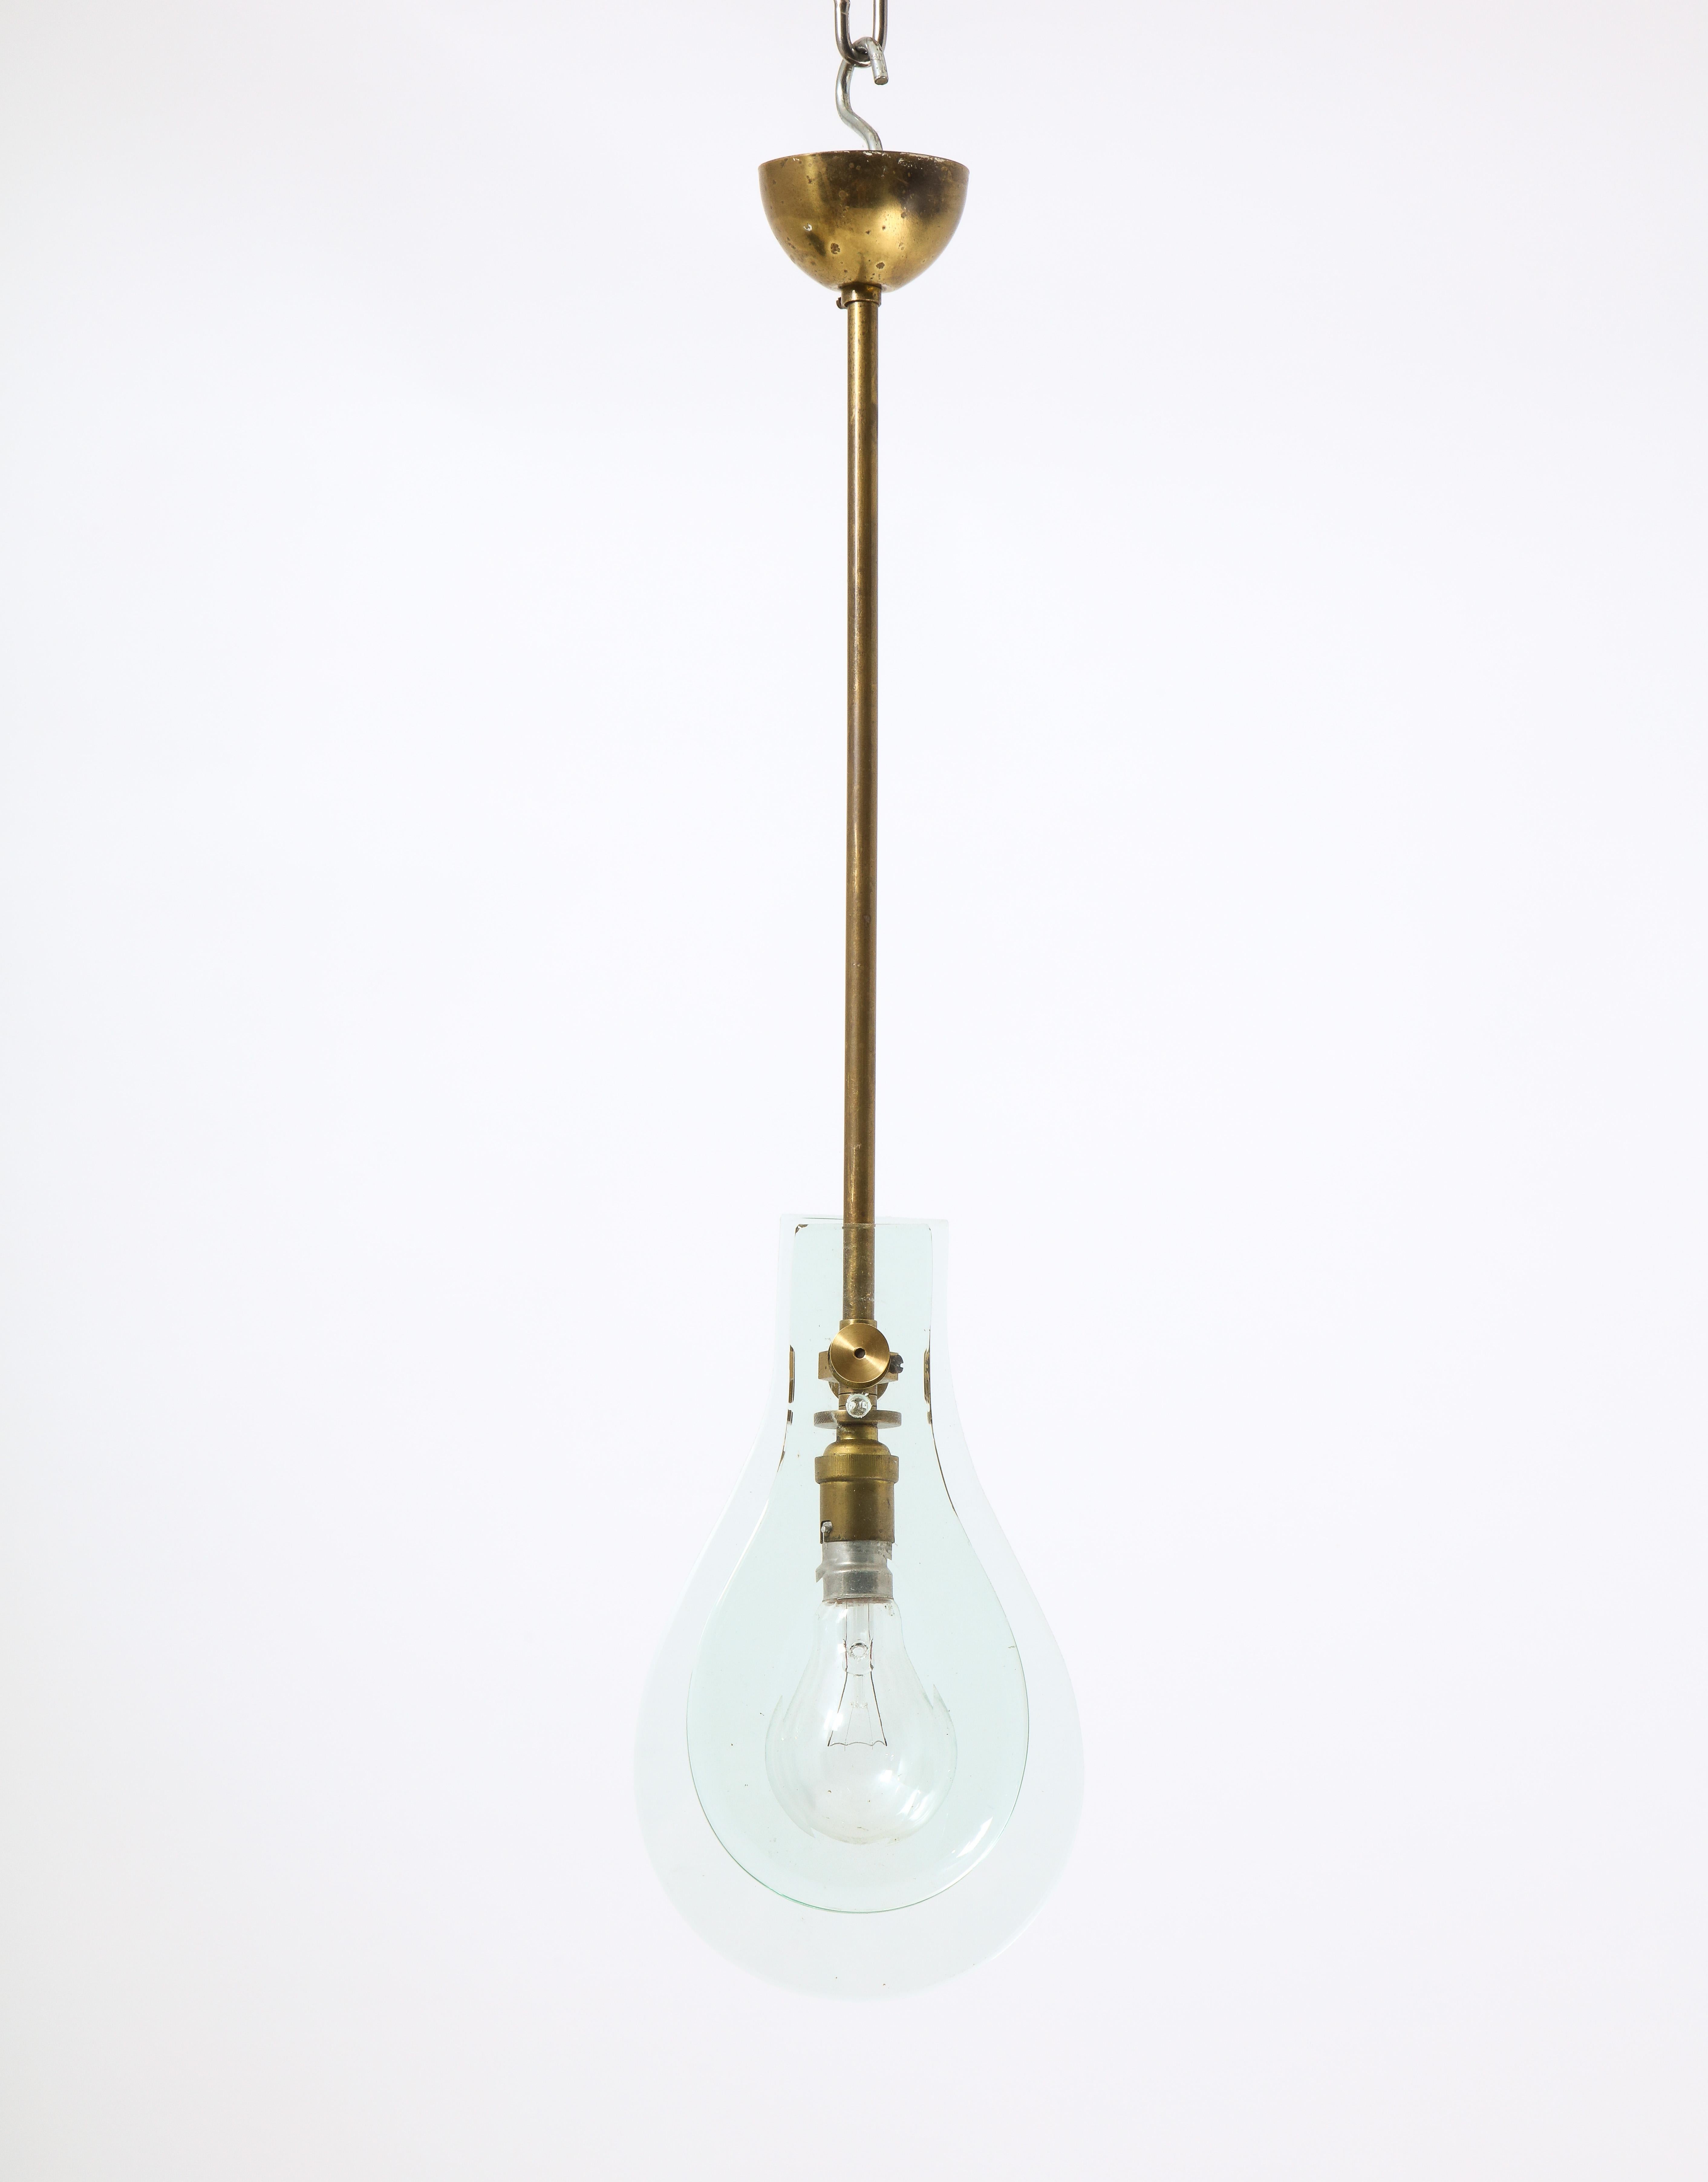 Italian Cast Glass and Brass Teardrop Pendant in Style of Max Ingrand, Italy 1960's For Sale